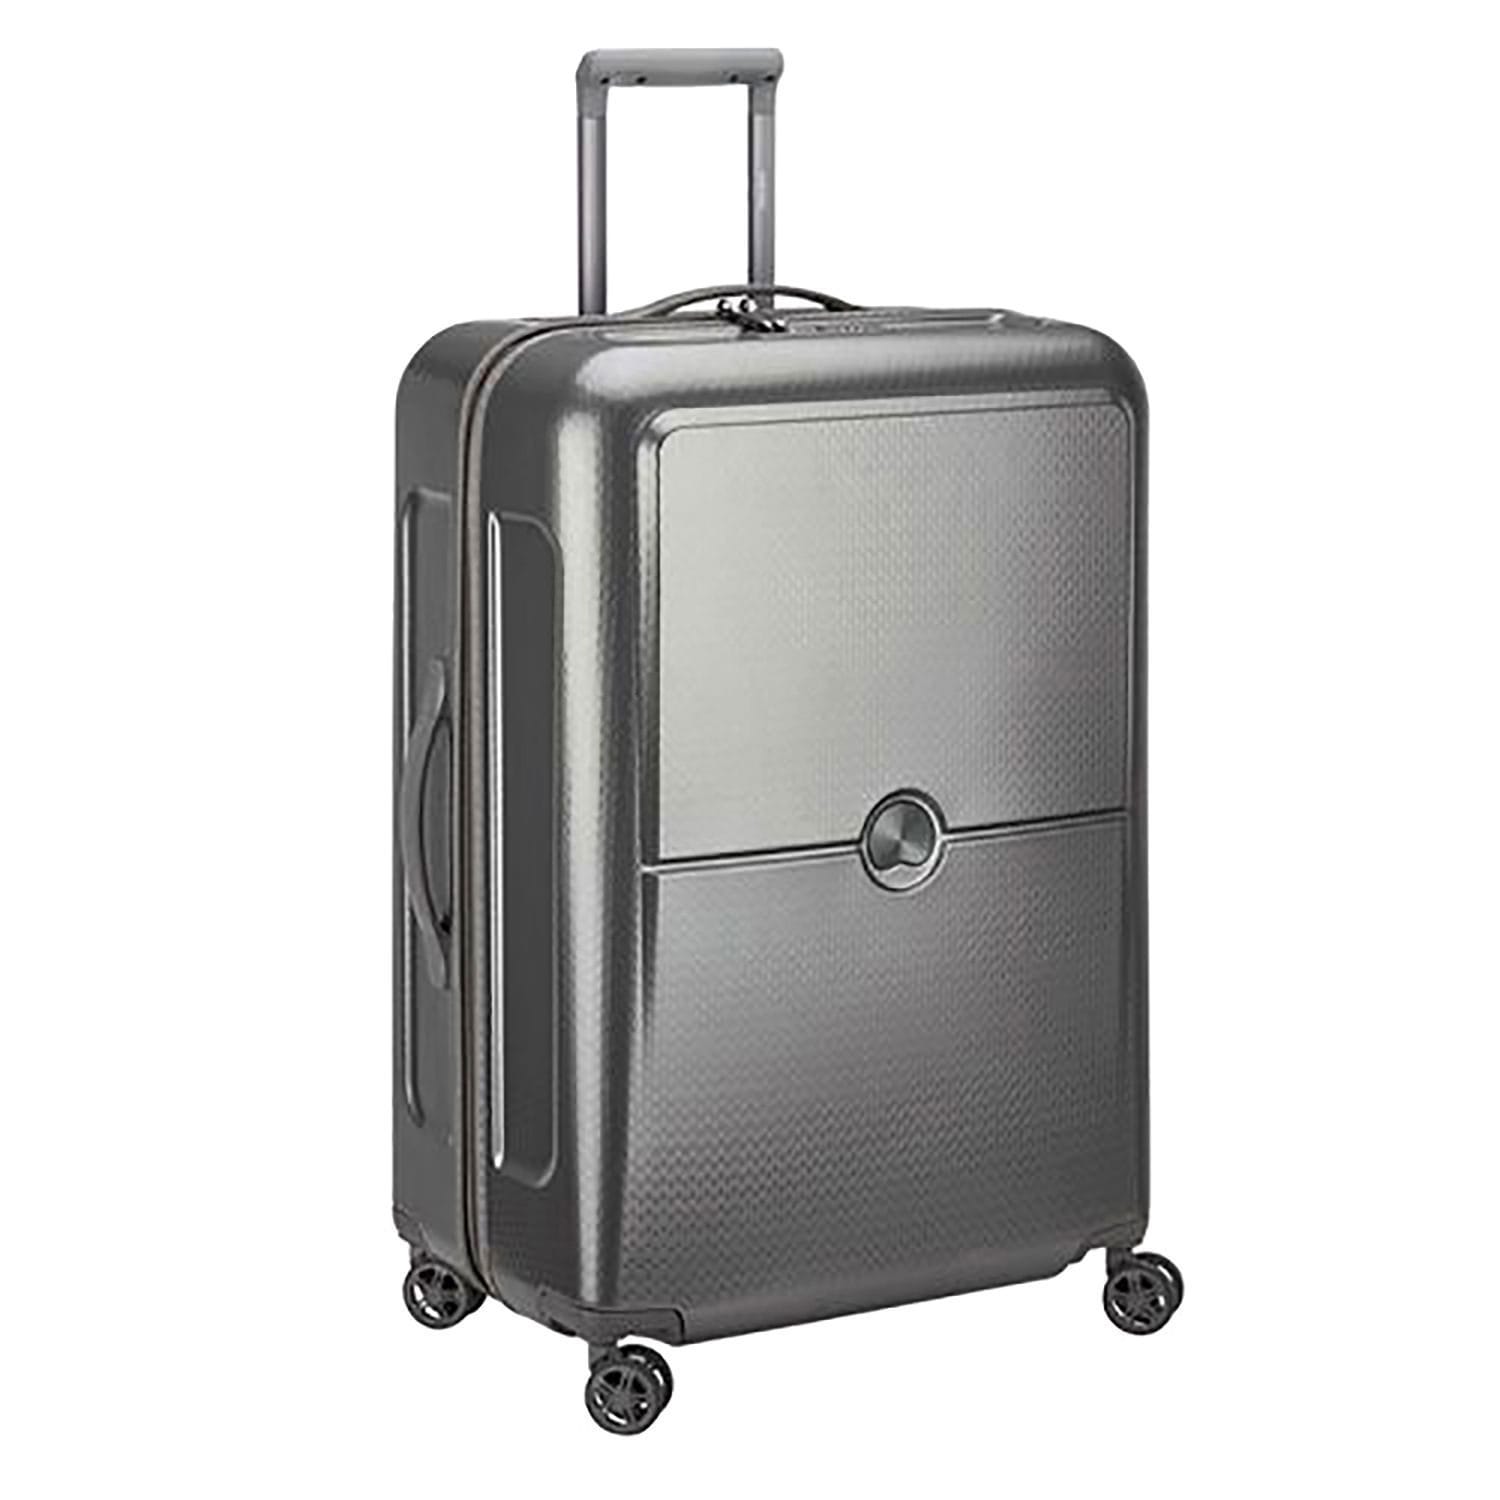 Delsey Turenne 70 4 Double Wheel Trolley Case - Silver - 00162182011 SILVER - Jashanmal Home